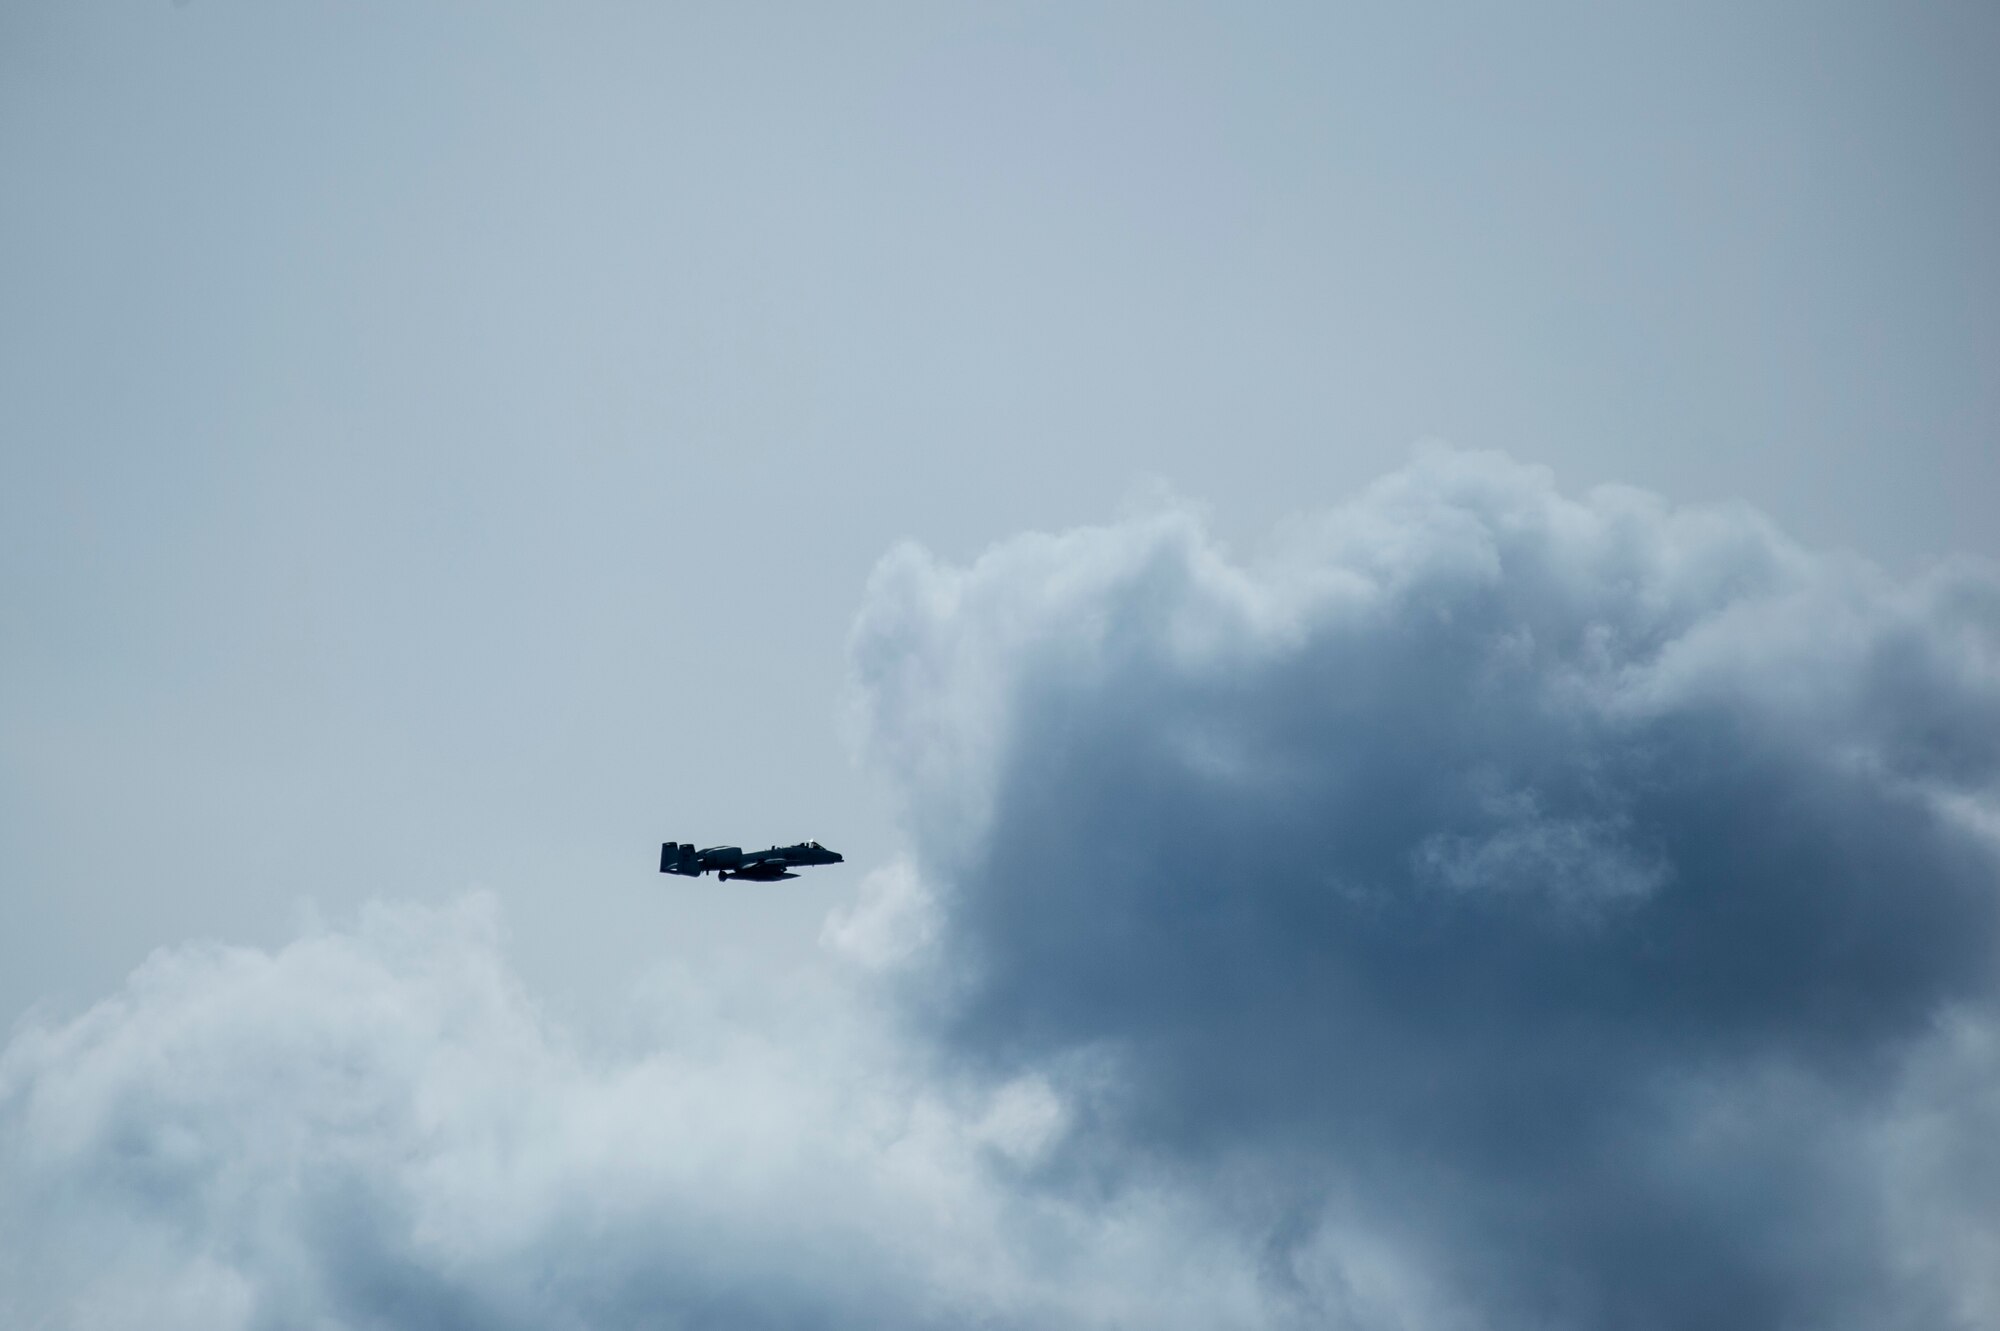 An A-10 Thunderbolt II attack aircraft fly's over Ämari Air Base, Estonia, May 1, 2015. The A-10 supports Air Force missions around the world as part of the U.S. Air Force's current inventory of strike platforms, including the F-15E Strike Eagle and the F-16 Fighting Falcon fighter aircraft. (U.S. Air Force photo by Senior Airman Rusty Frank/Released)